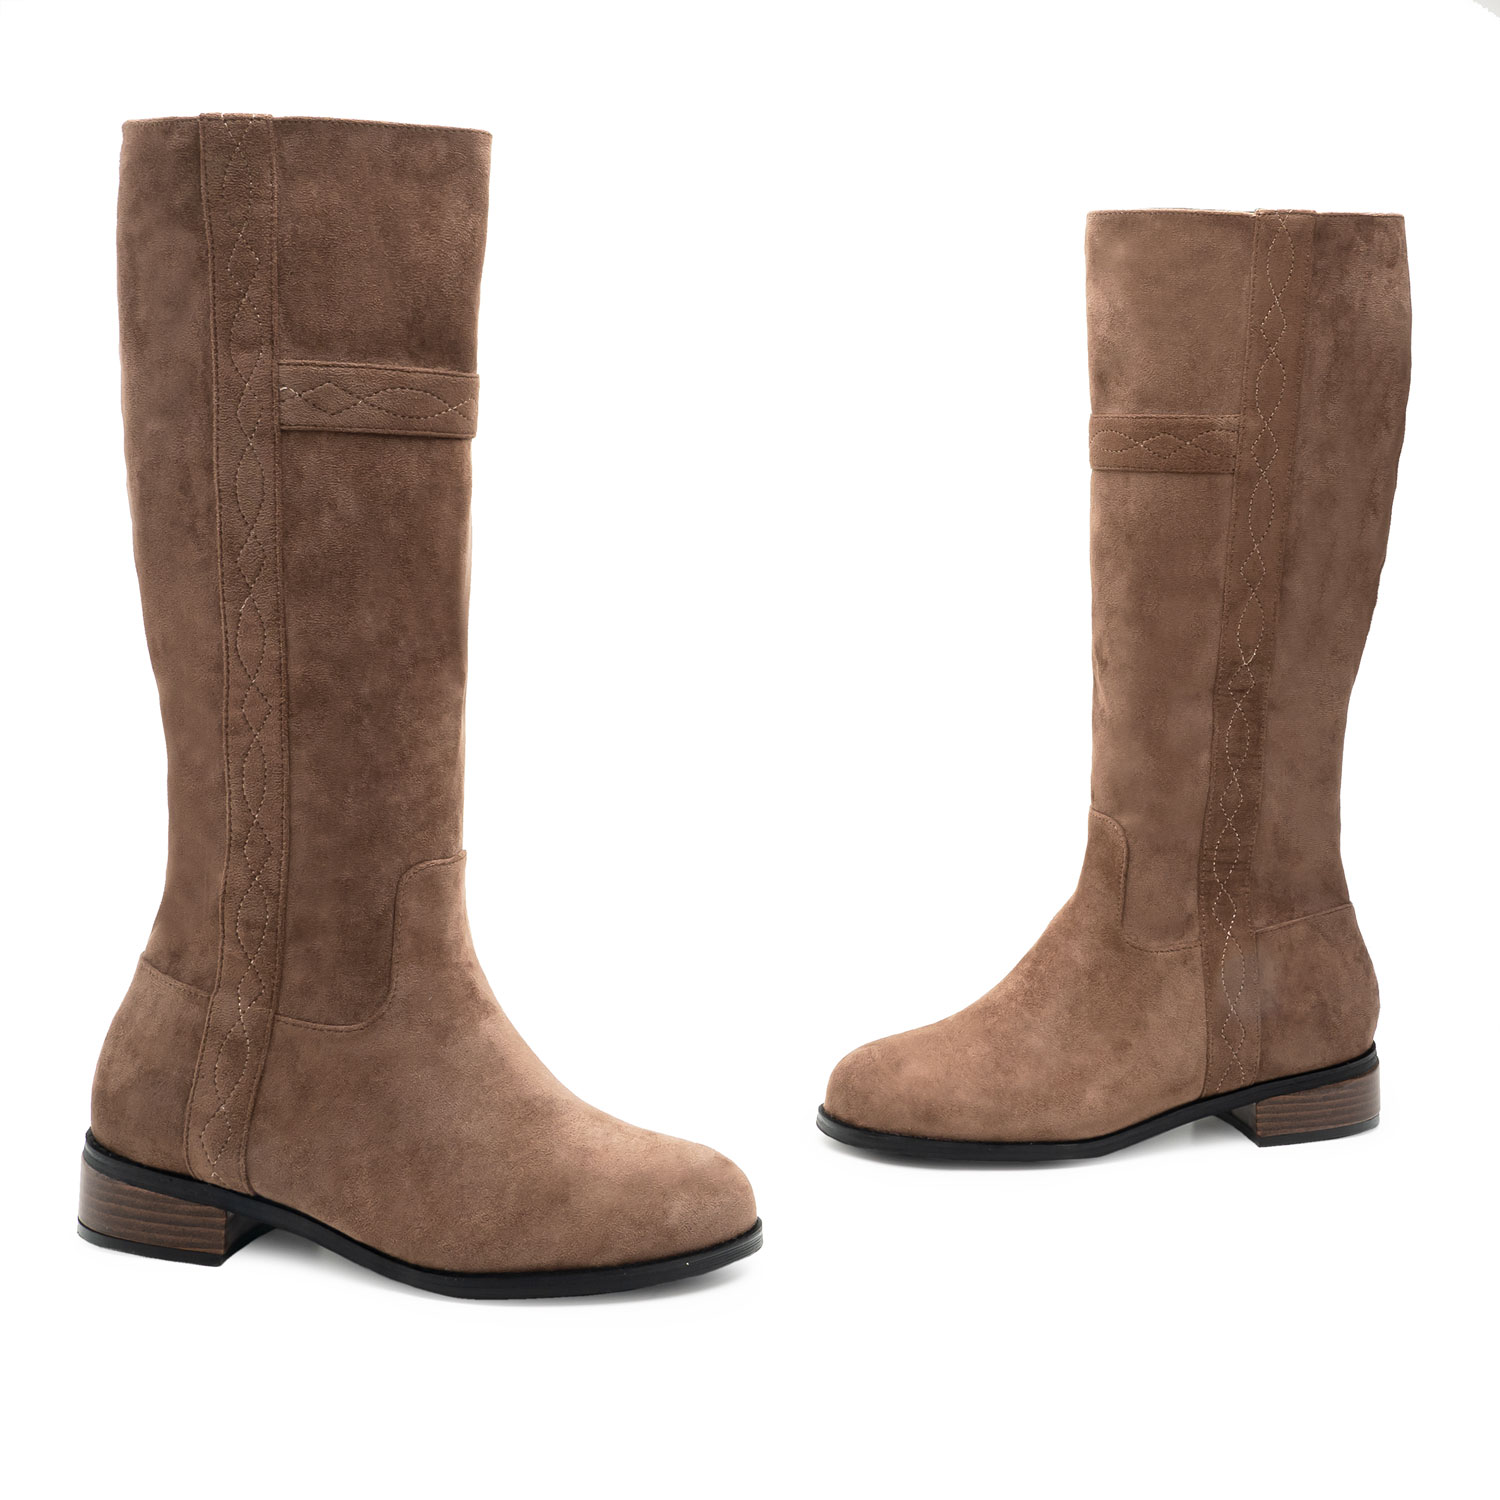 Riding Boots in Taupe Suedette 